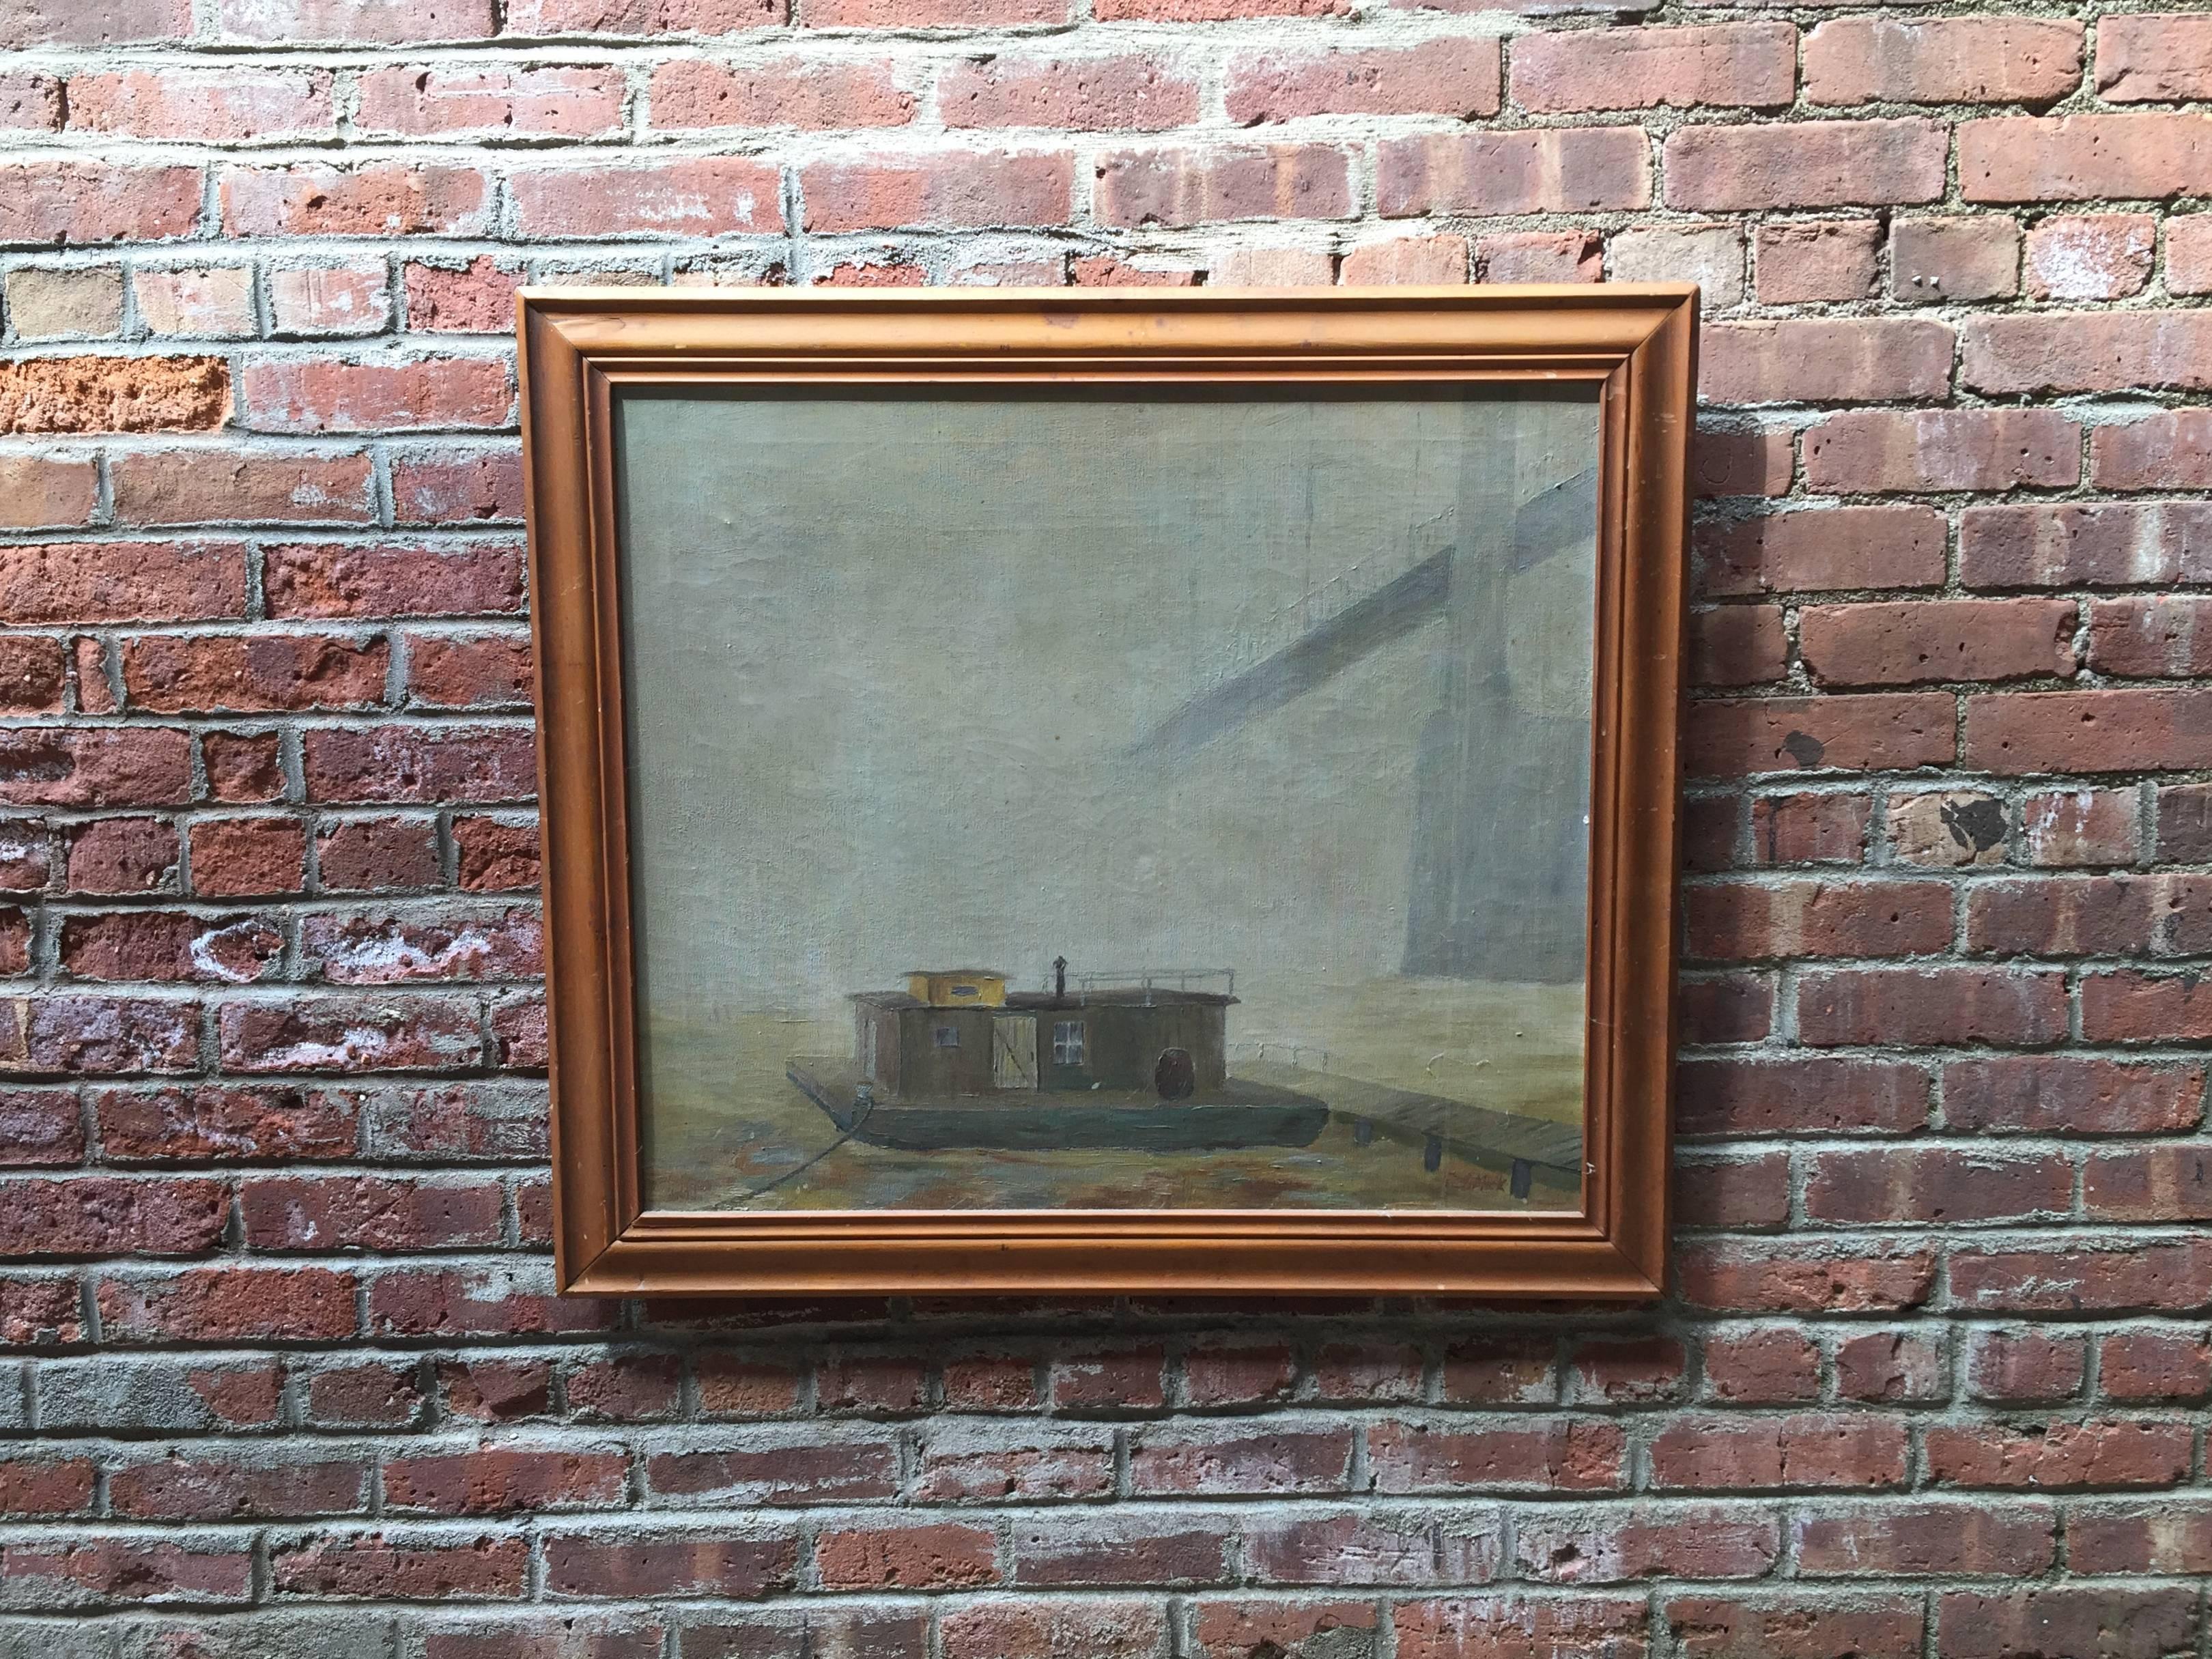 Oil painting on canvas of a river scene depicting a docked boathouse with a bridge lost in the fog in the background. Signed lower right, Mick (?) and verso on the frame. There appears to be two initials preceding the last name, but they are